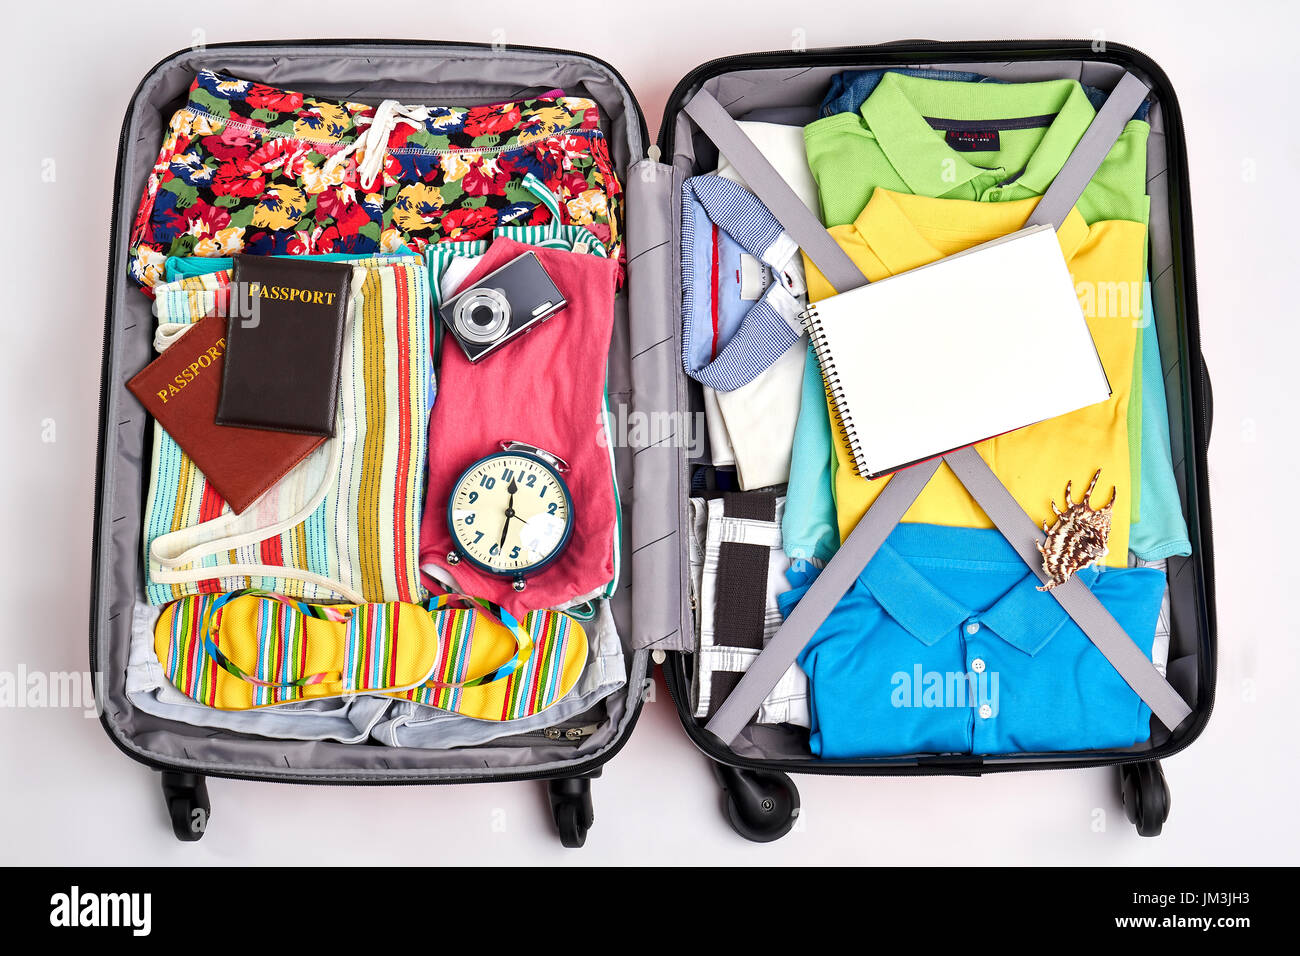 Ready suitcase for travelling. Opened suitcase full of clothing. Stock Photo